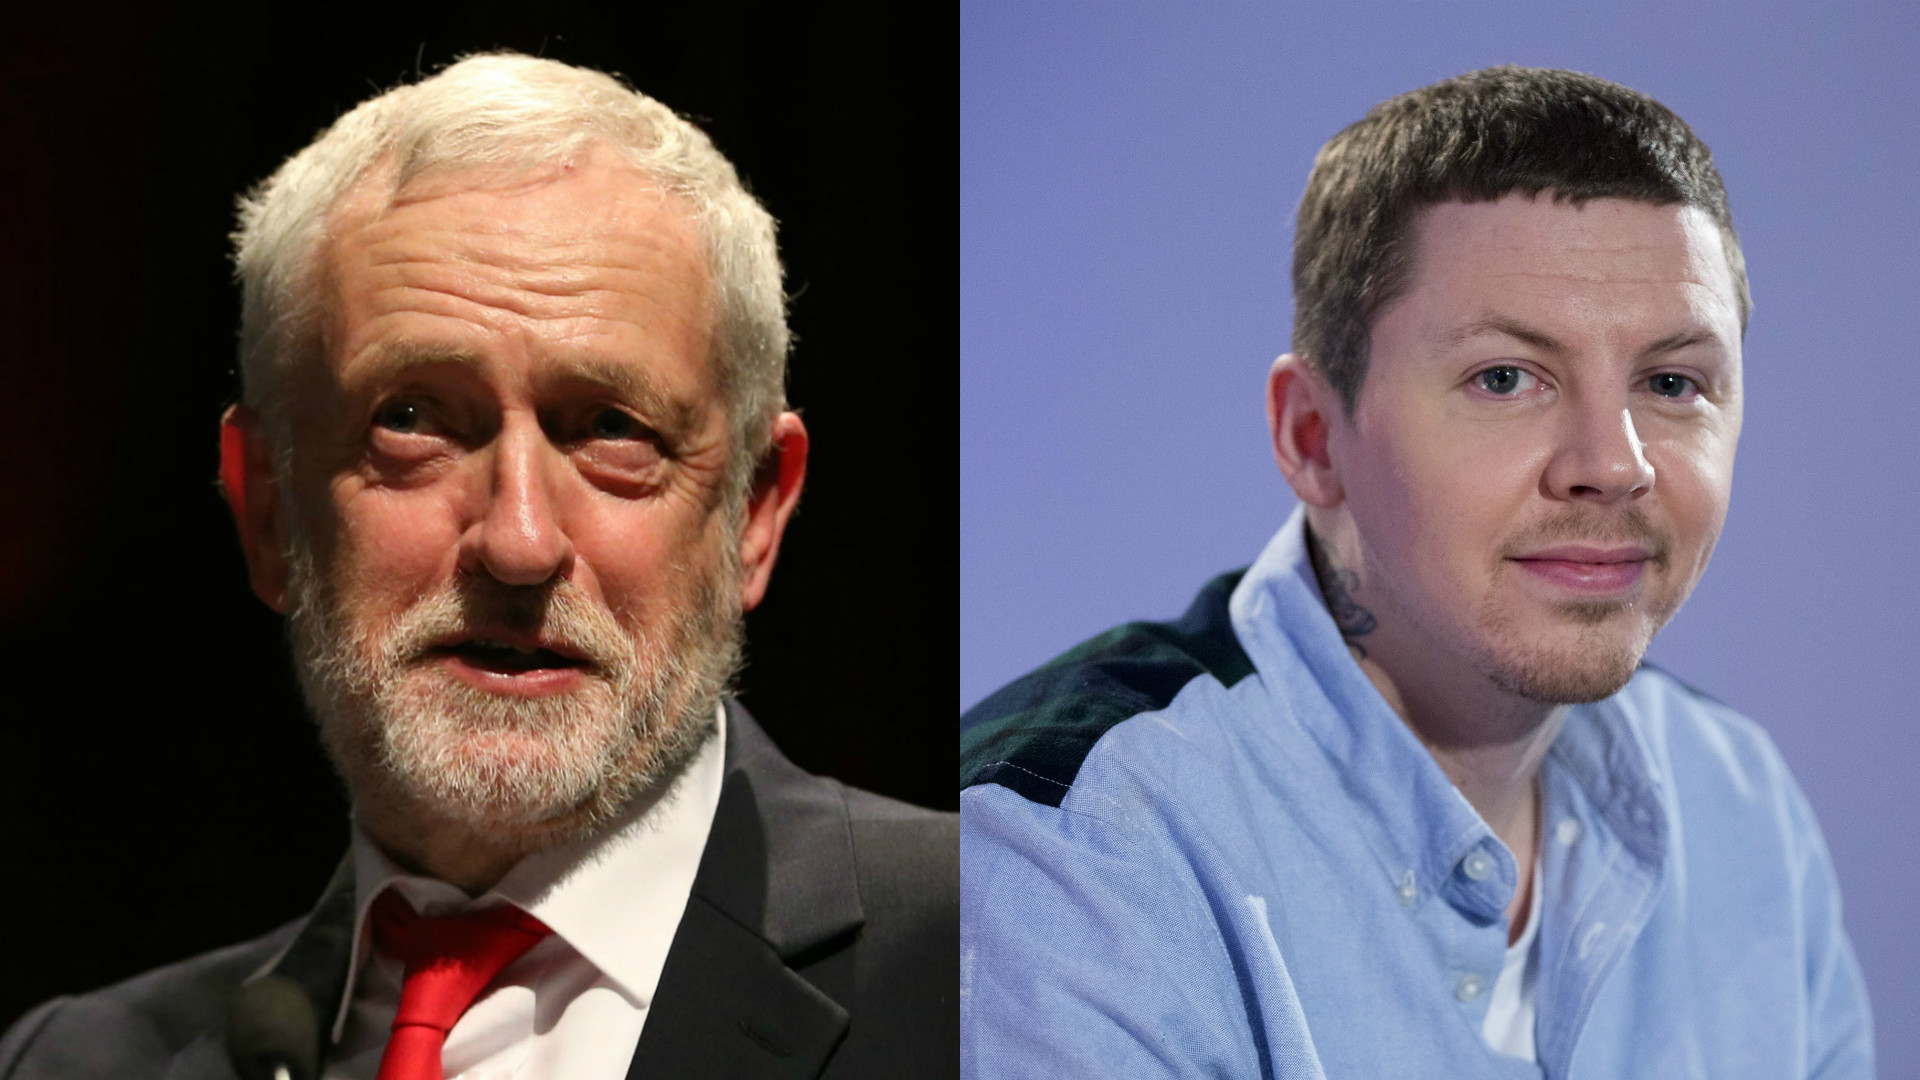 Professor Green urges fans to support Jeremy Corbyn in election